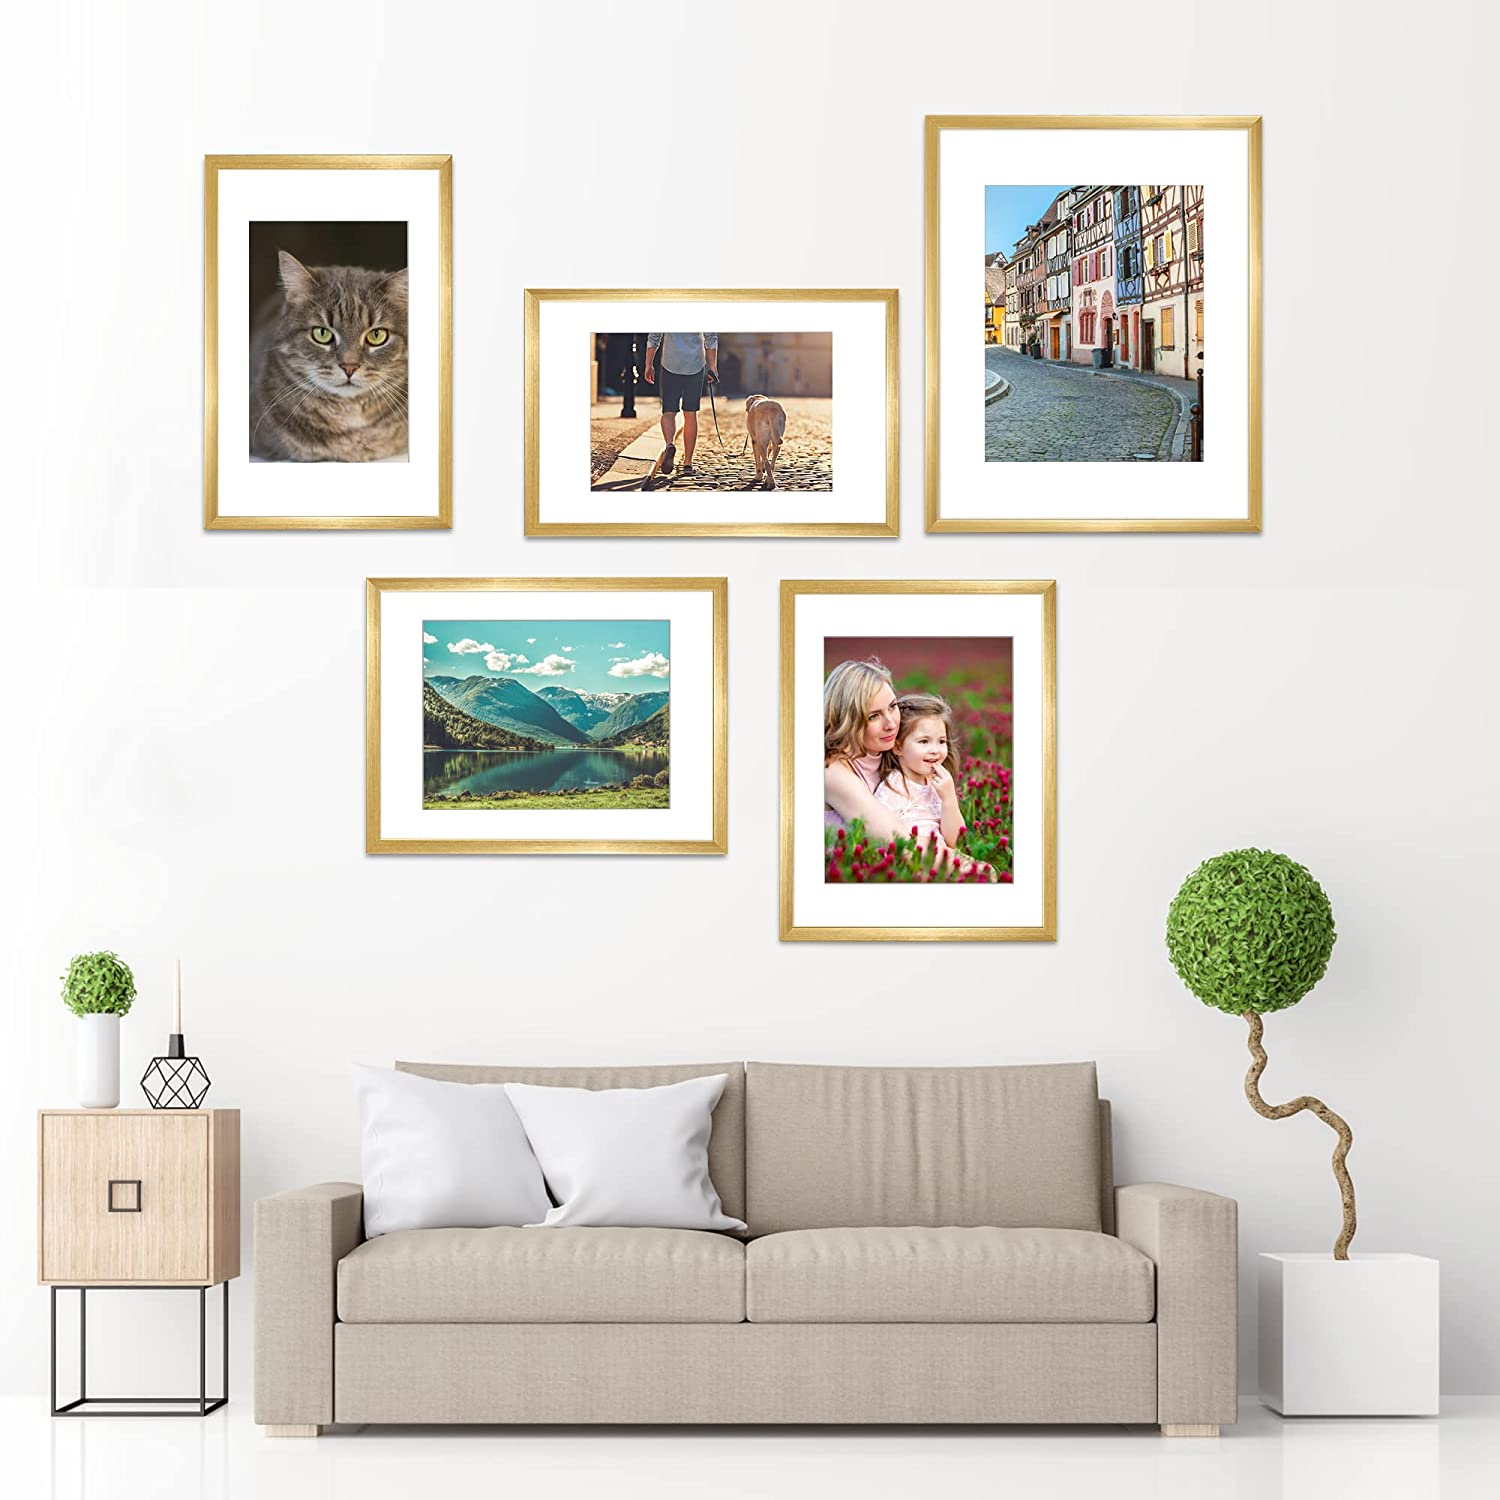 ENJOYBASICS 16x20 Picture Frame Gold Poster Frame, Display Pictures 11x14  with Mat or 16x20 Without Mat, Wall Gallery Photo Frames, 2 Pack